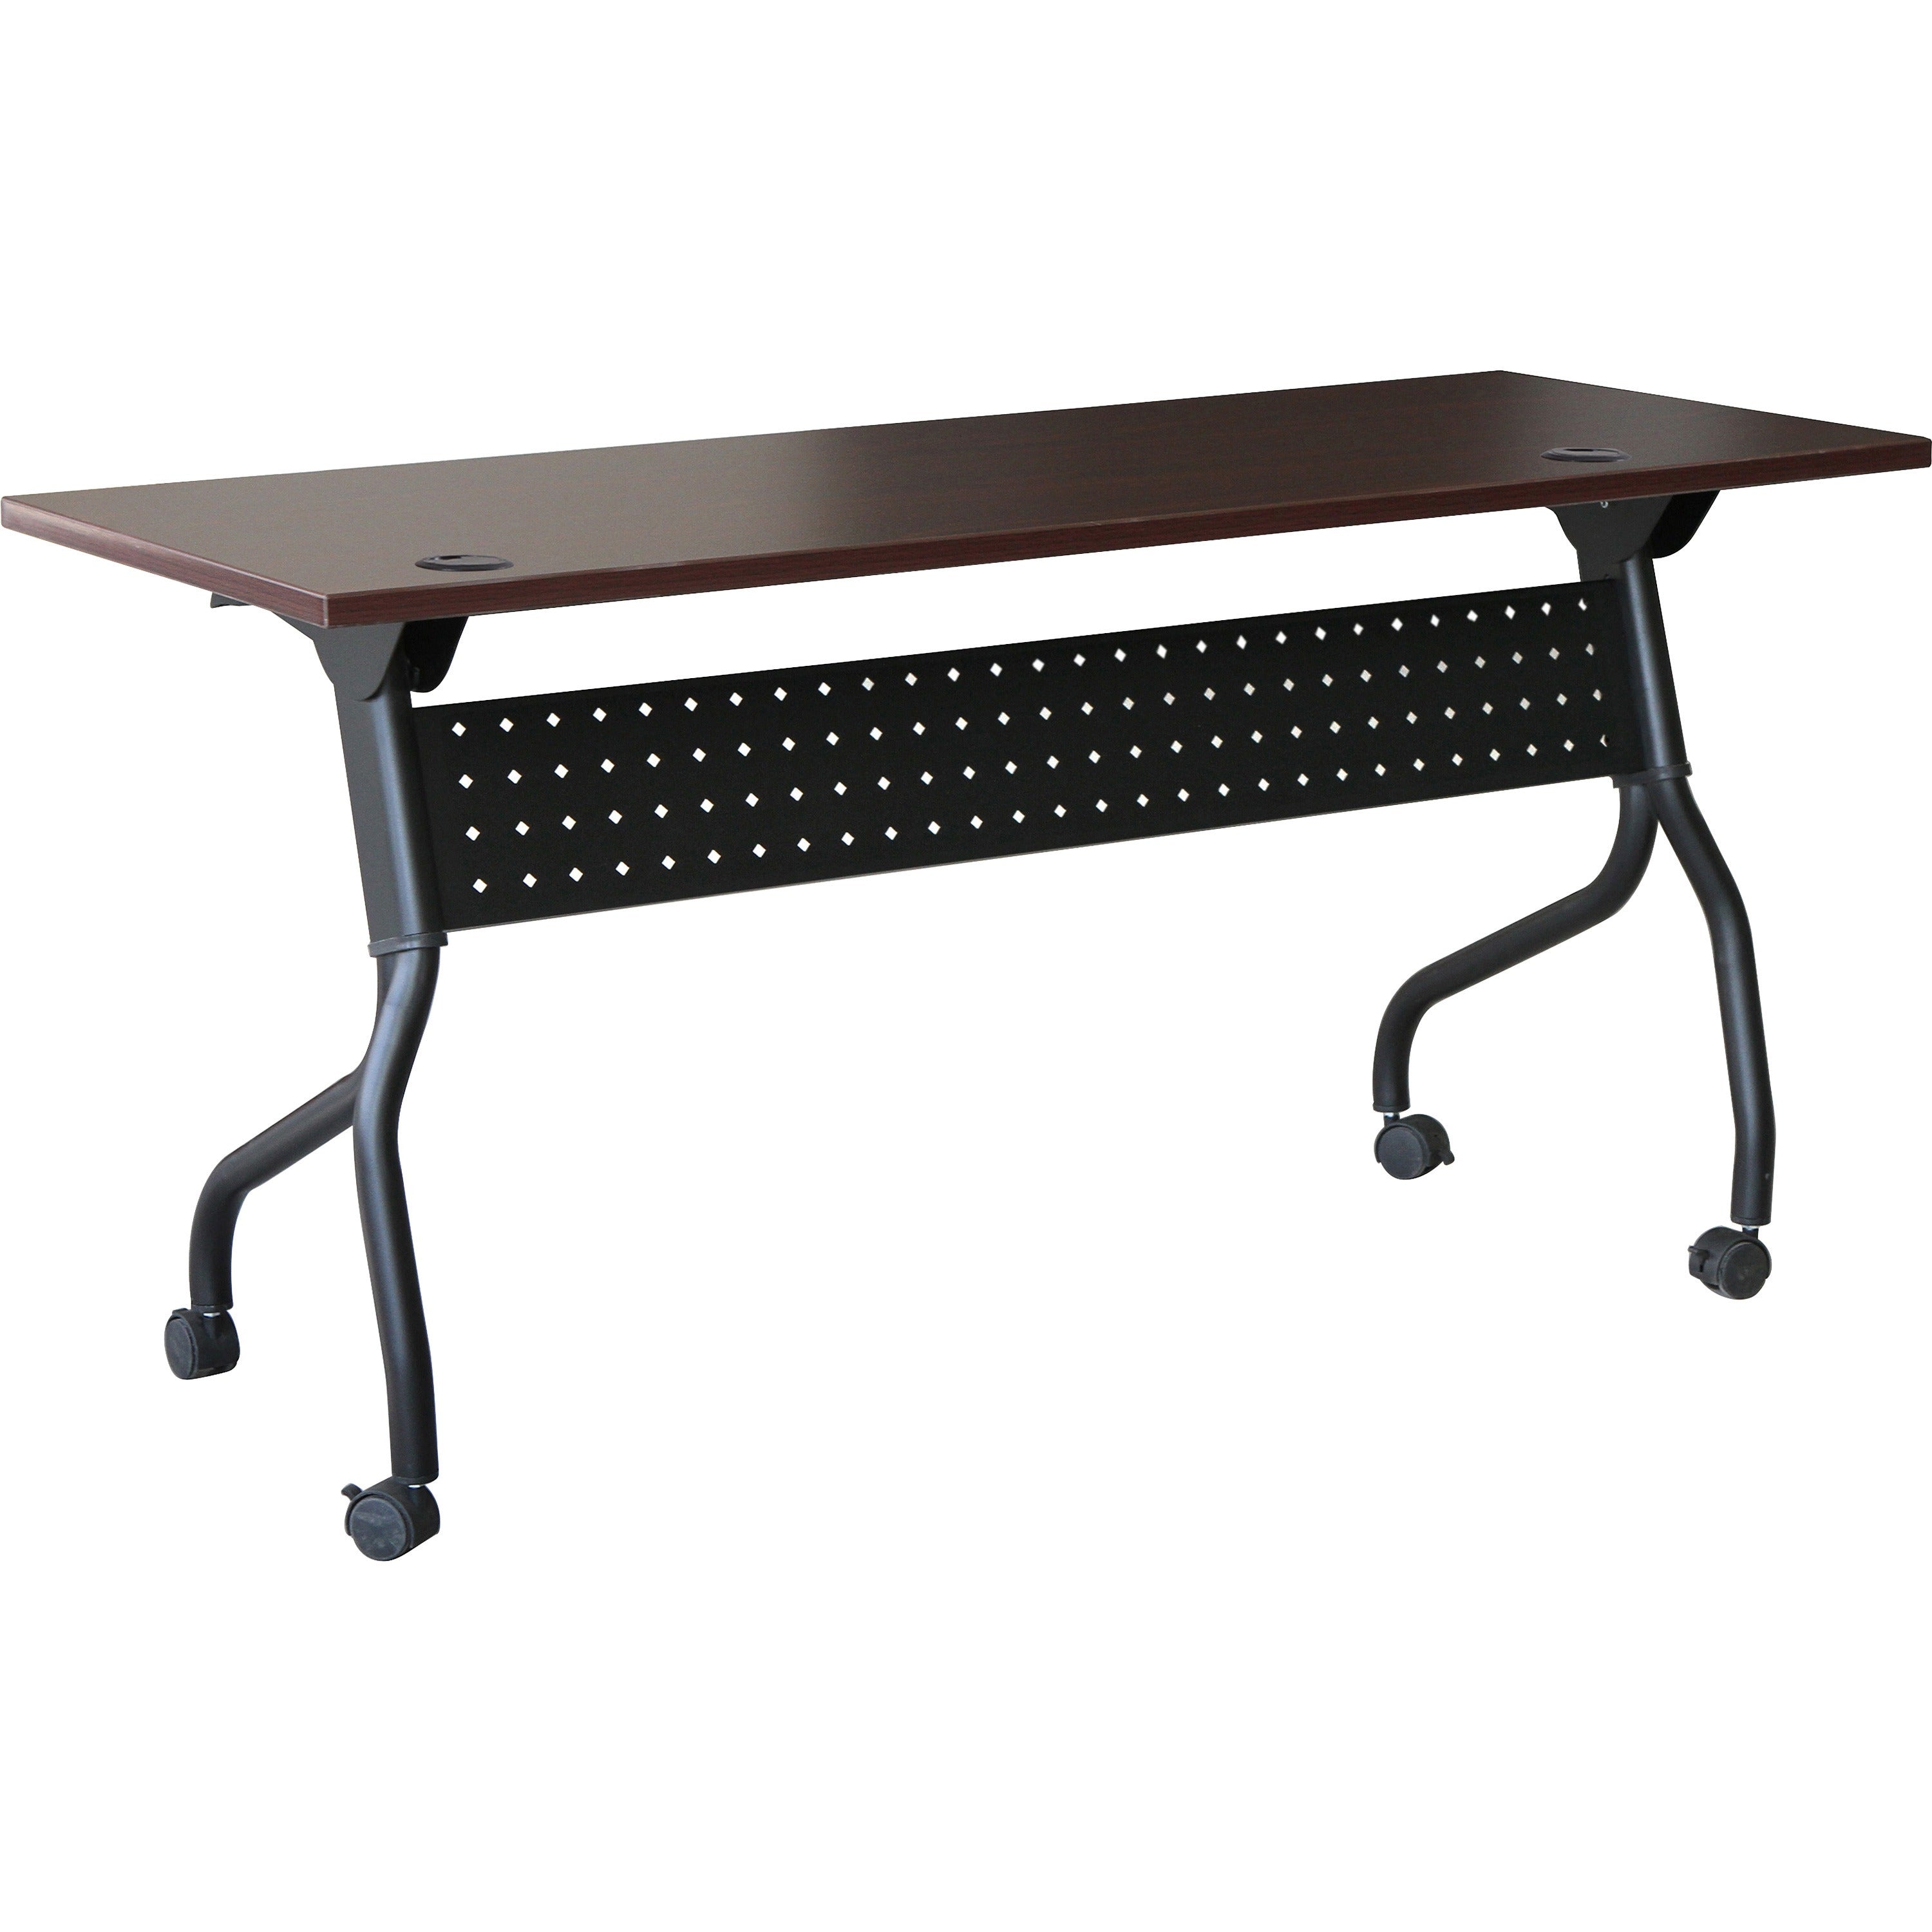 Lorell Flip Top Training Table - For - Table TopRectangle Top - Four Leg Base - 4 Legs x 48" Table Top Width x 23.60" Table Top Depth - 29.50" Height x 47.25" Width x 23.63" Depth - Assembly Required - Black, Mahogany - Melamine, Nylon - 1 Each - 